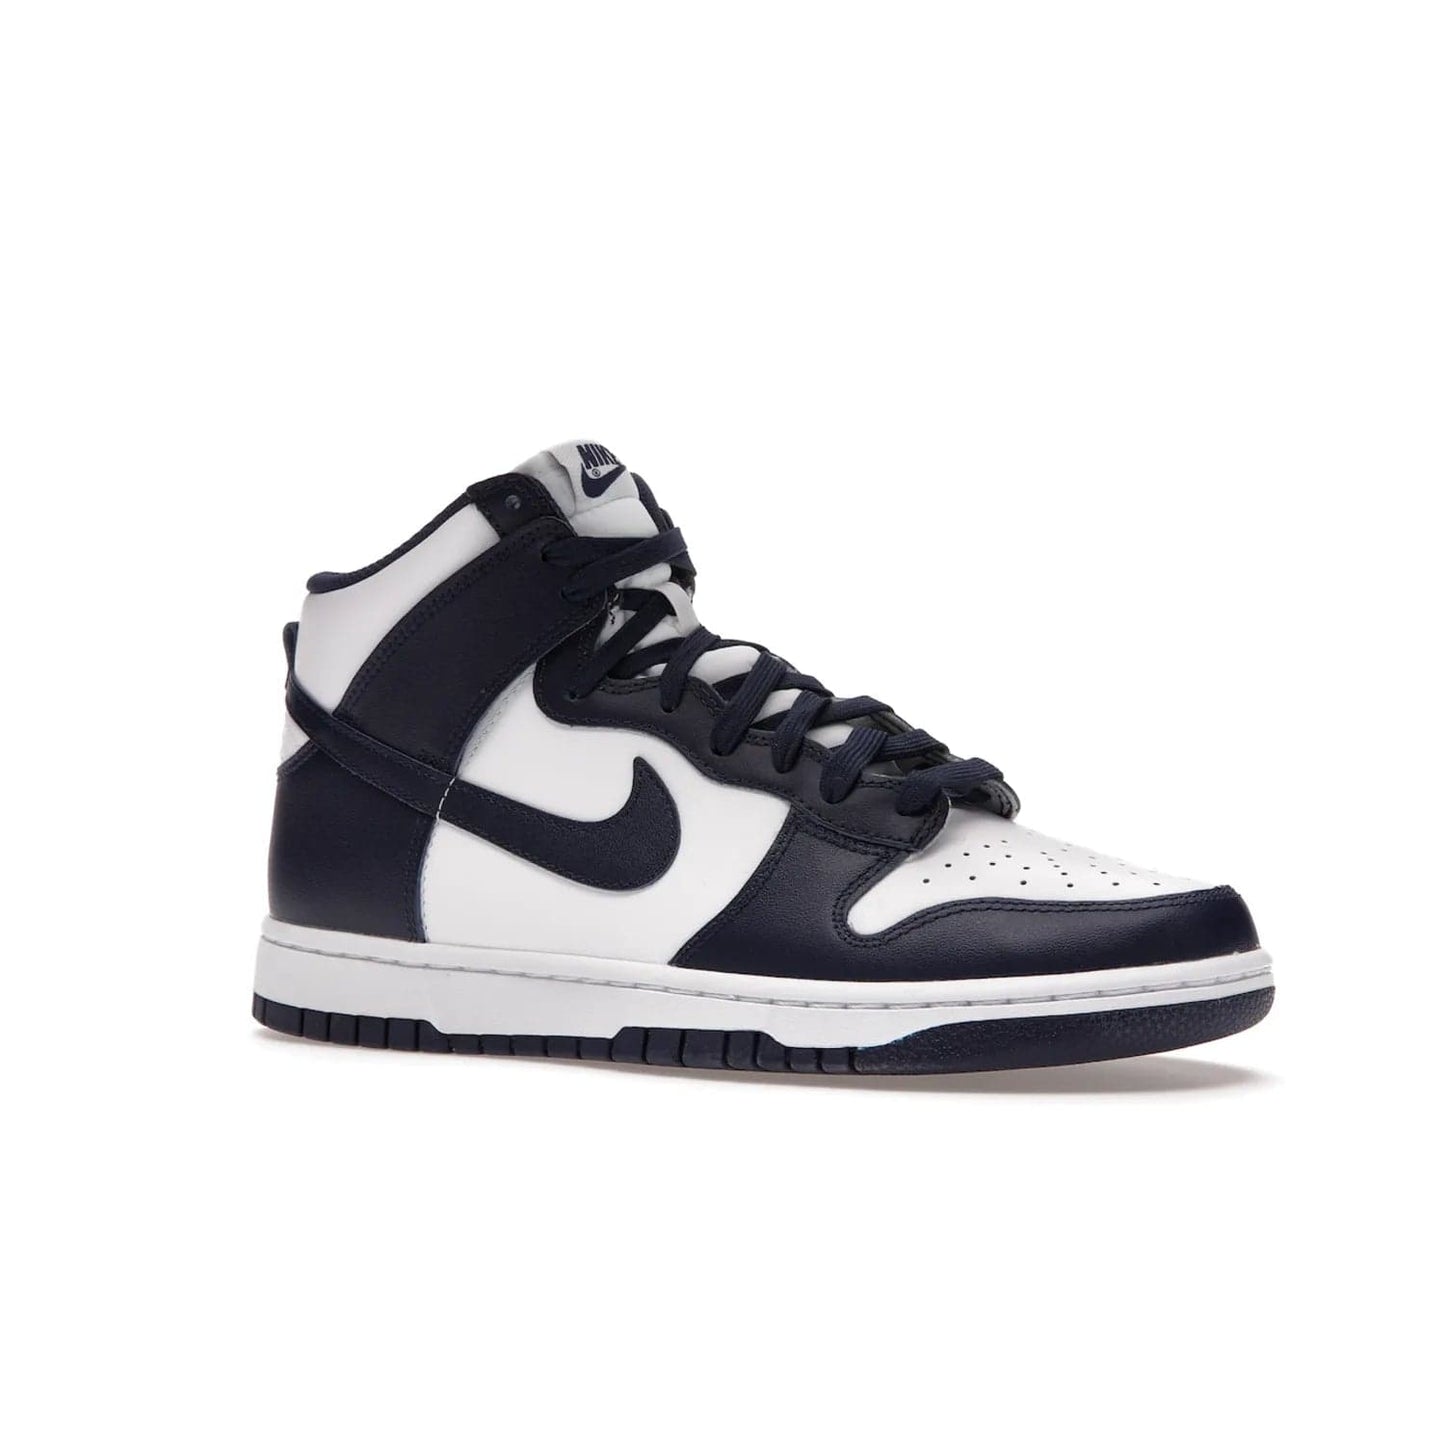 Nike Dunk High Championship Navy - Image 4 - Only at www.BallersClubKickz.com - Classic Nike Dunk High sneaker delivers an unforgettable style with white leather upper, Championship Navy overlays, and matching woven tongue label and sole. Make a statement with the Championship Navy today.